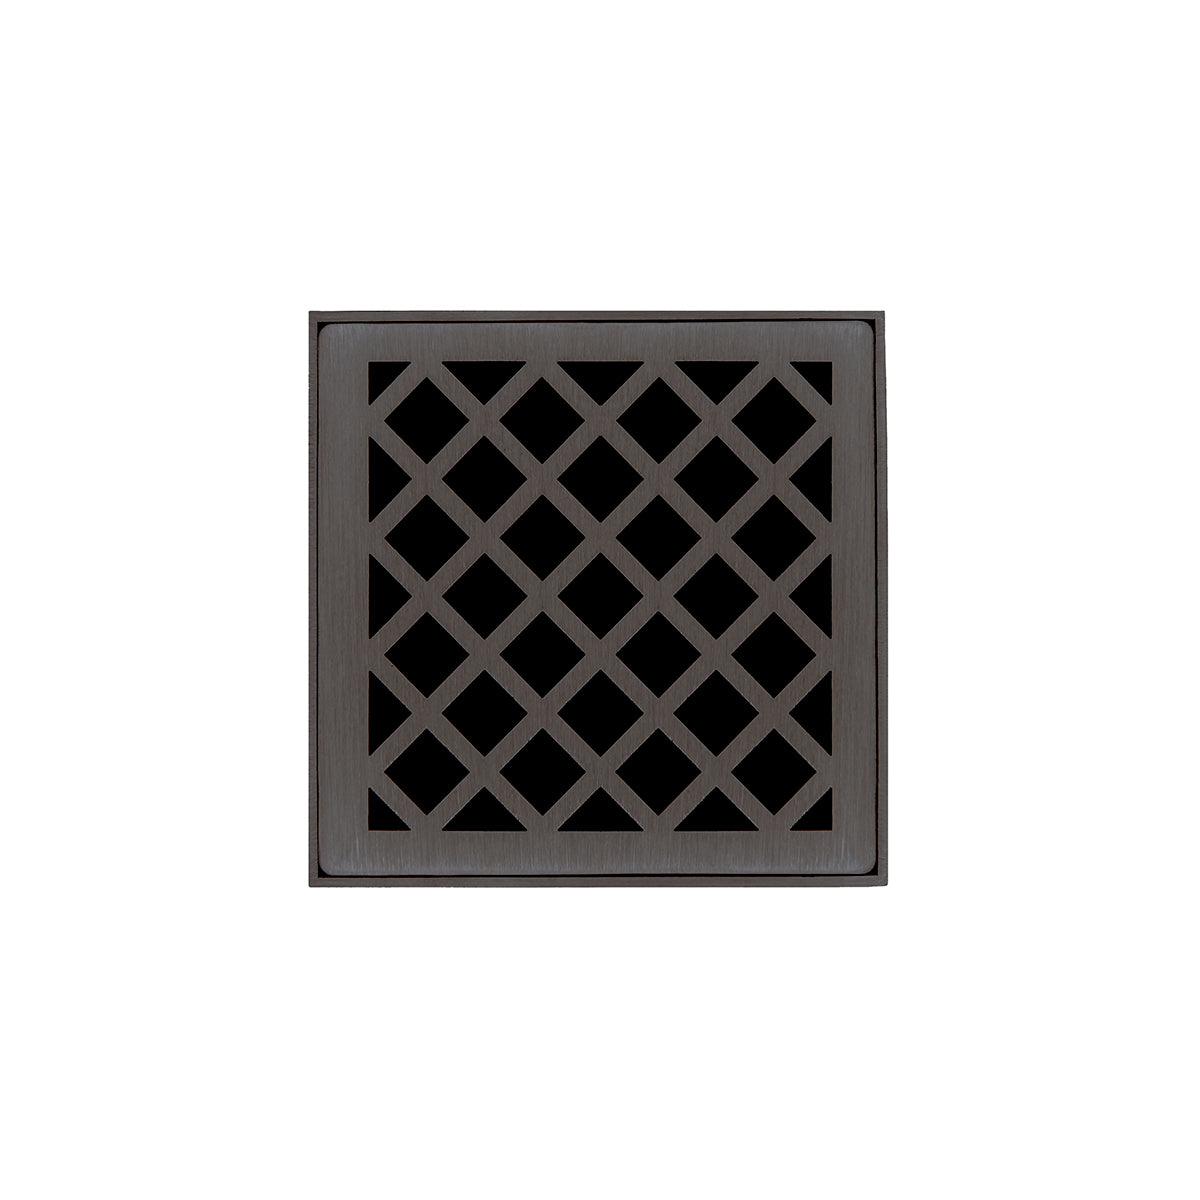 Infinity Drain 4" x 4" XD 4 Premium Center Drain Kit with Criss-Cross Pattern Decorative Plate with ABS Drain Body, 2" Outlet